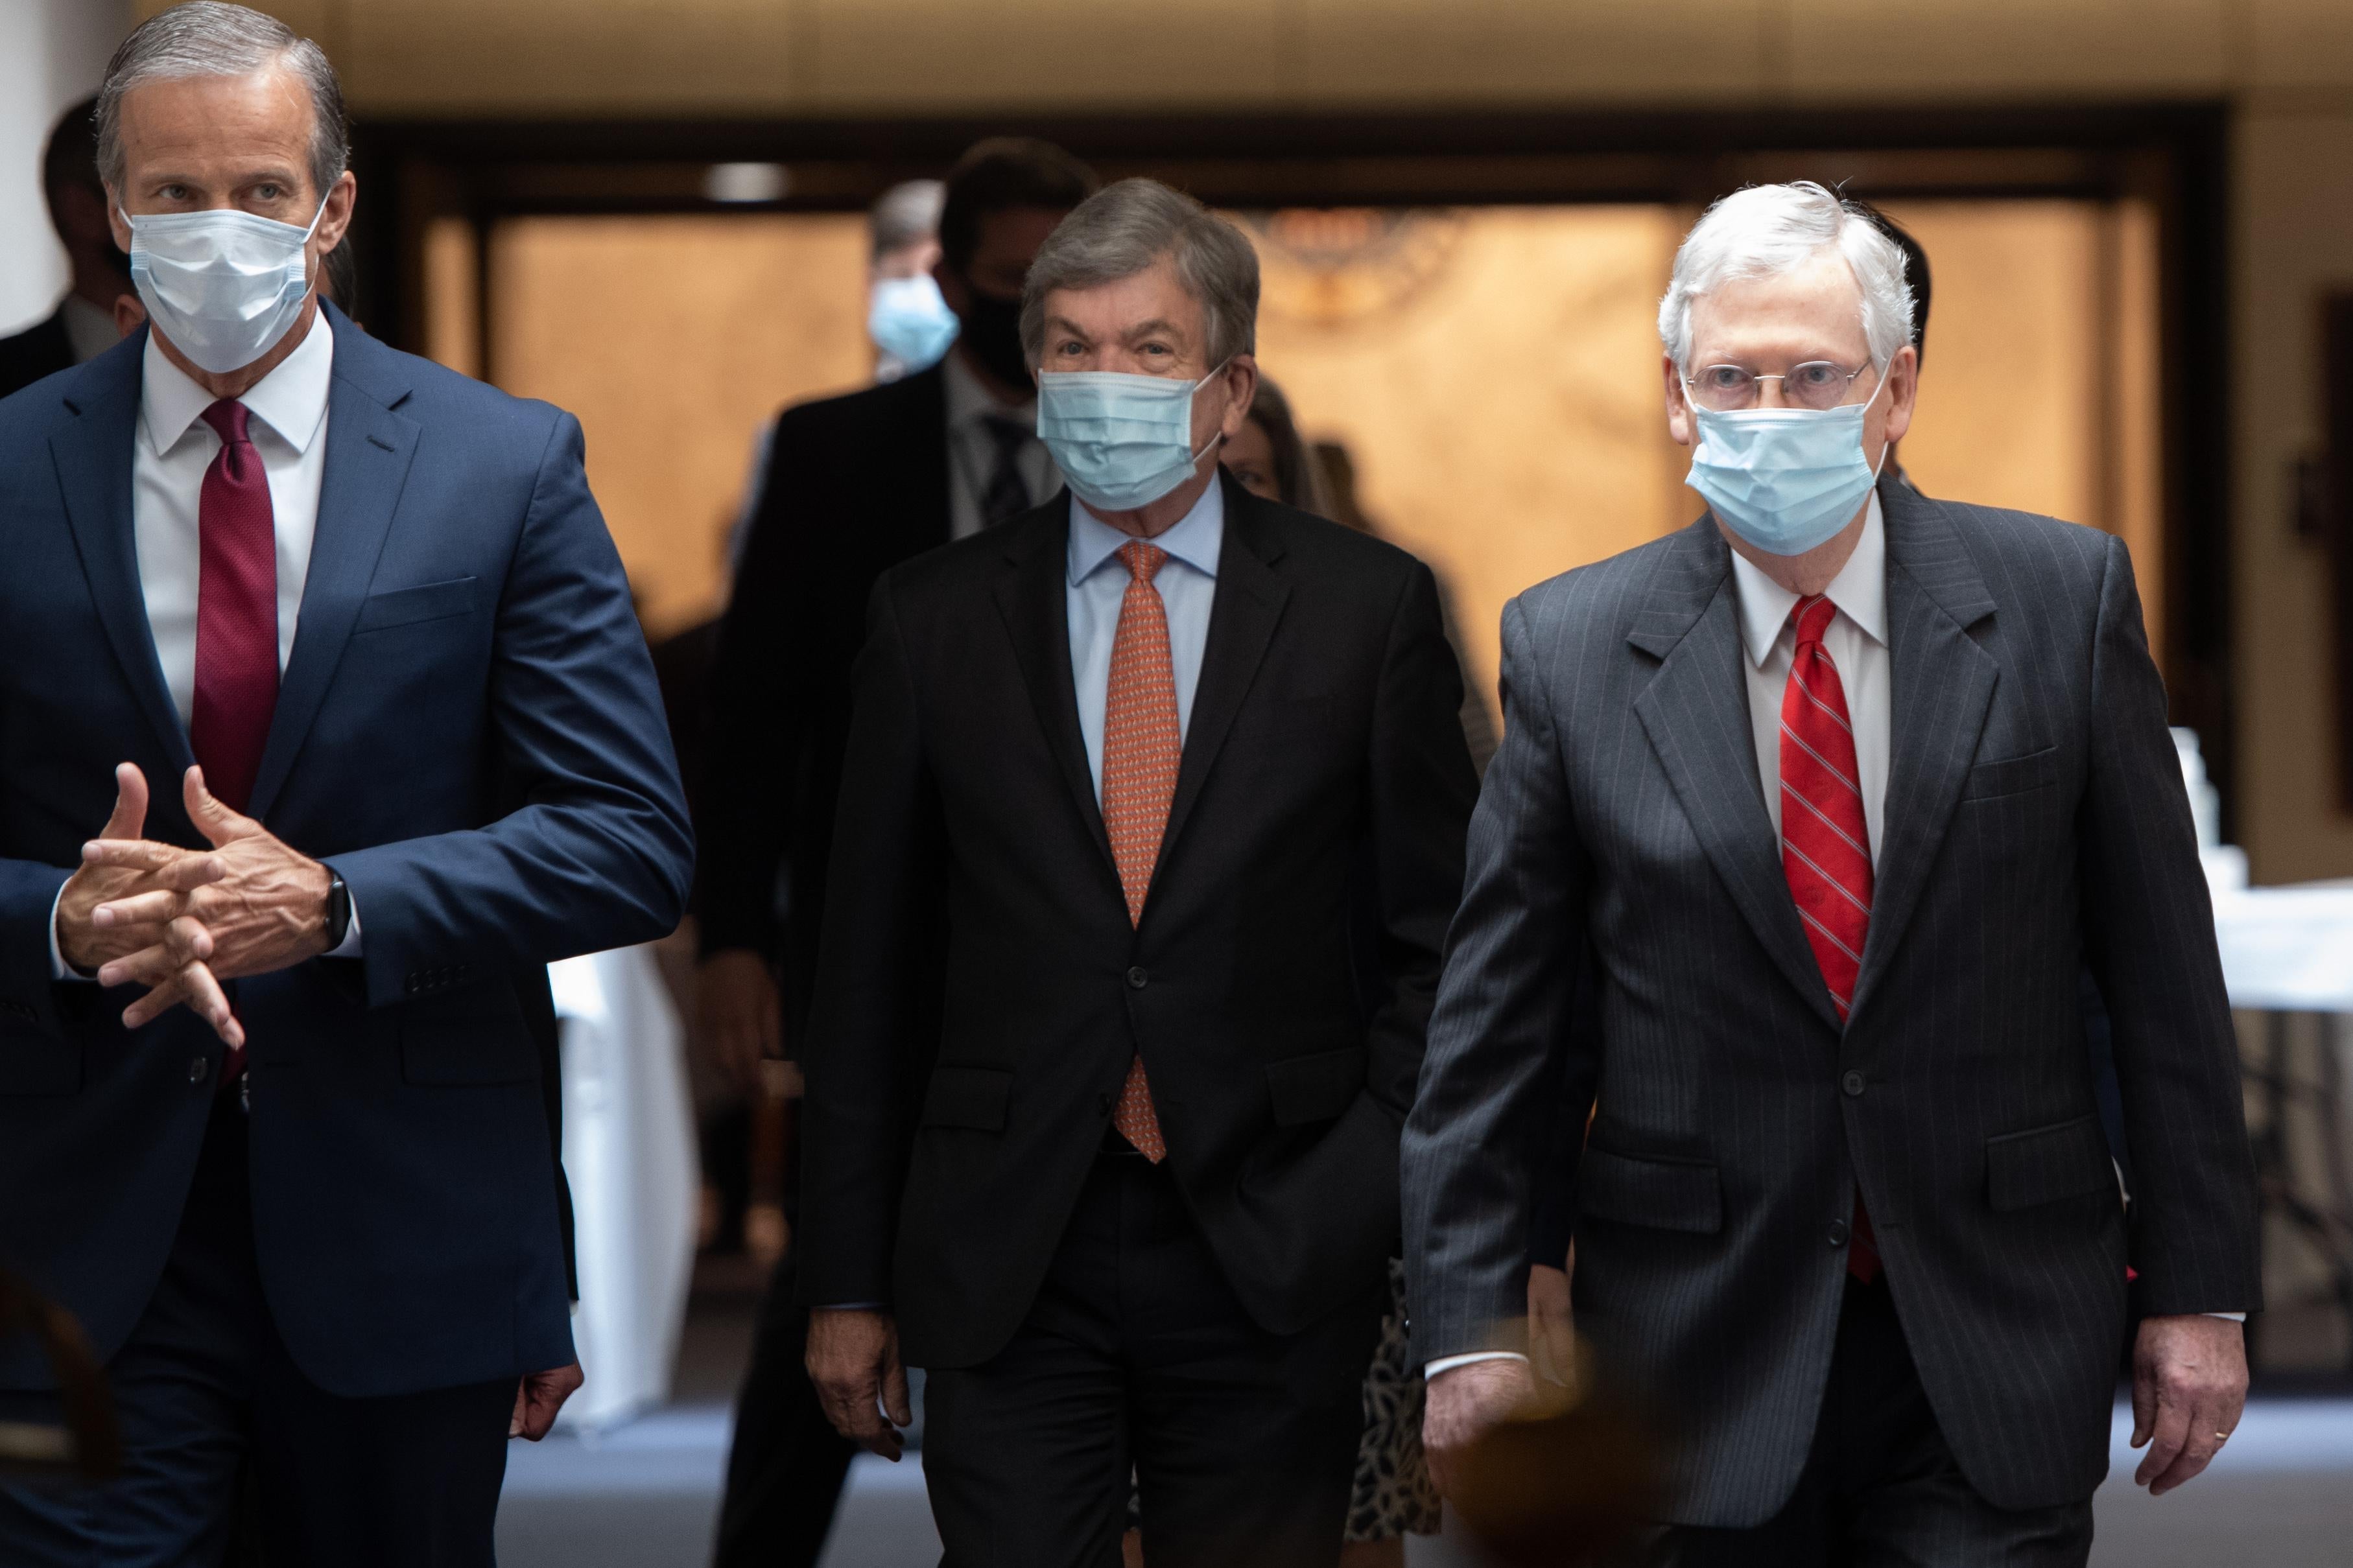 Three men in suits and face masks are walking